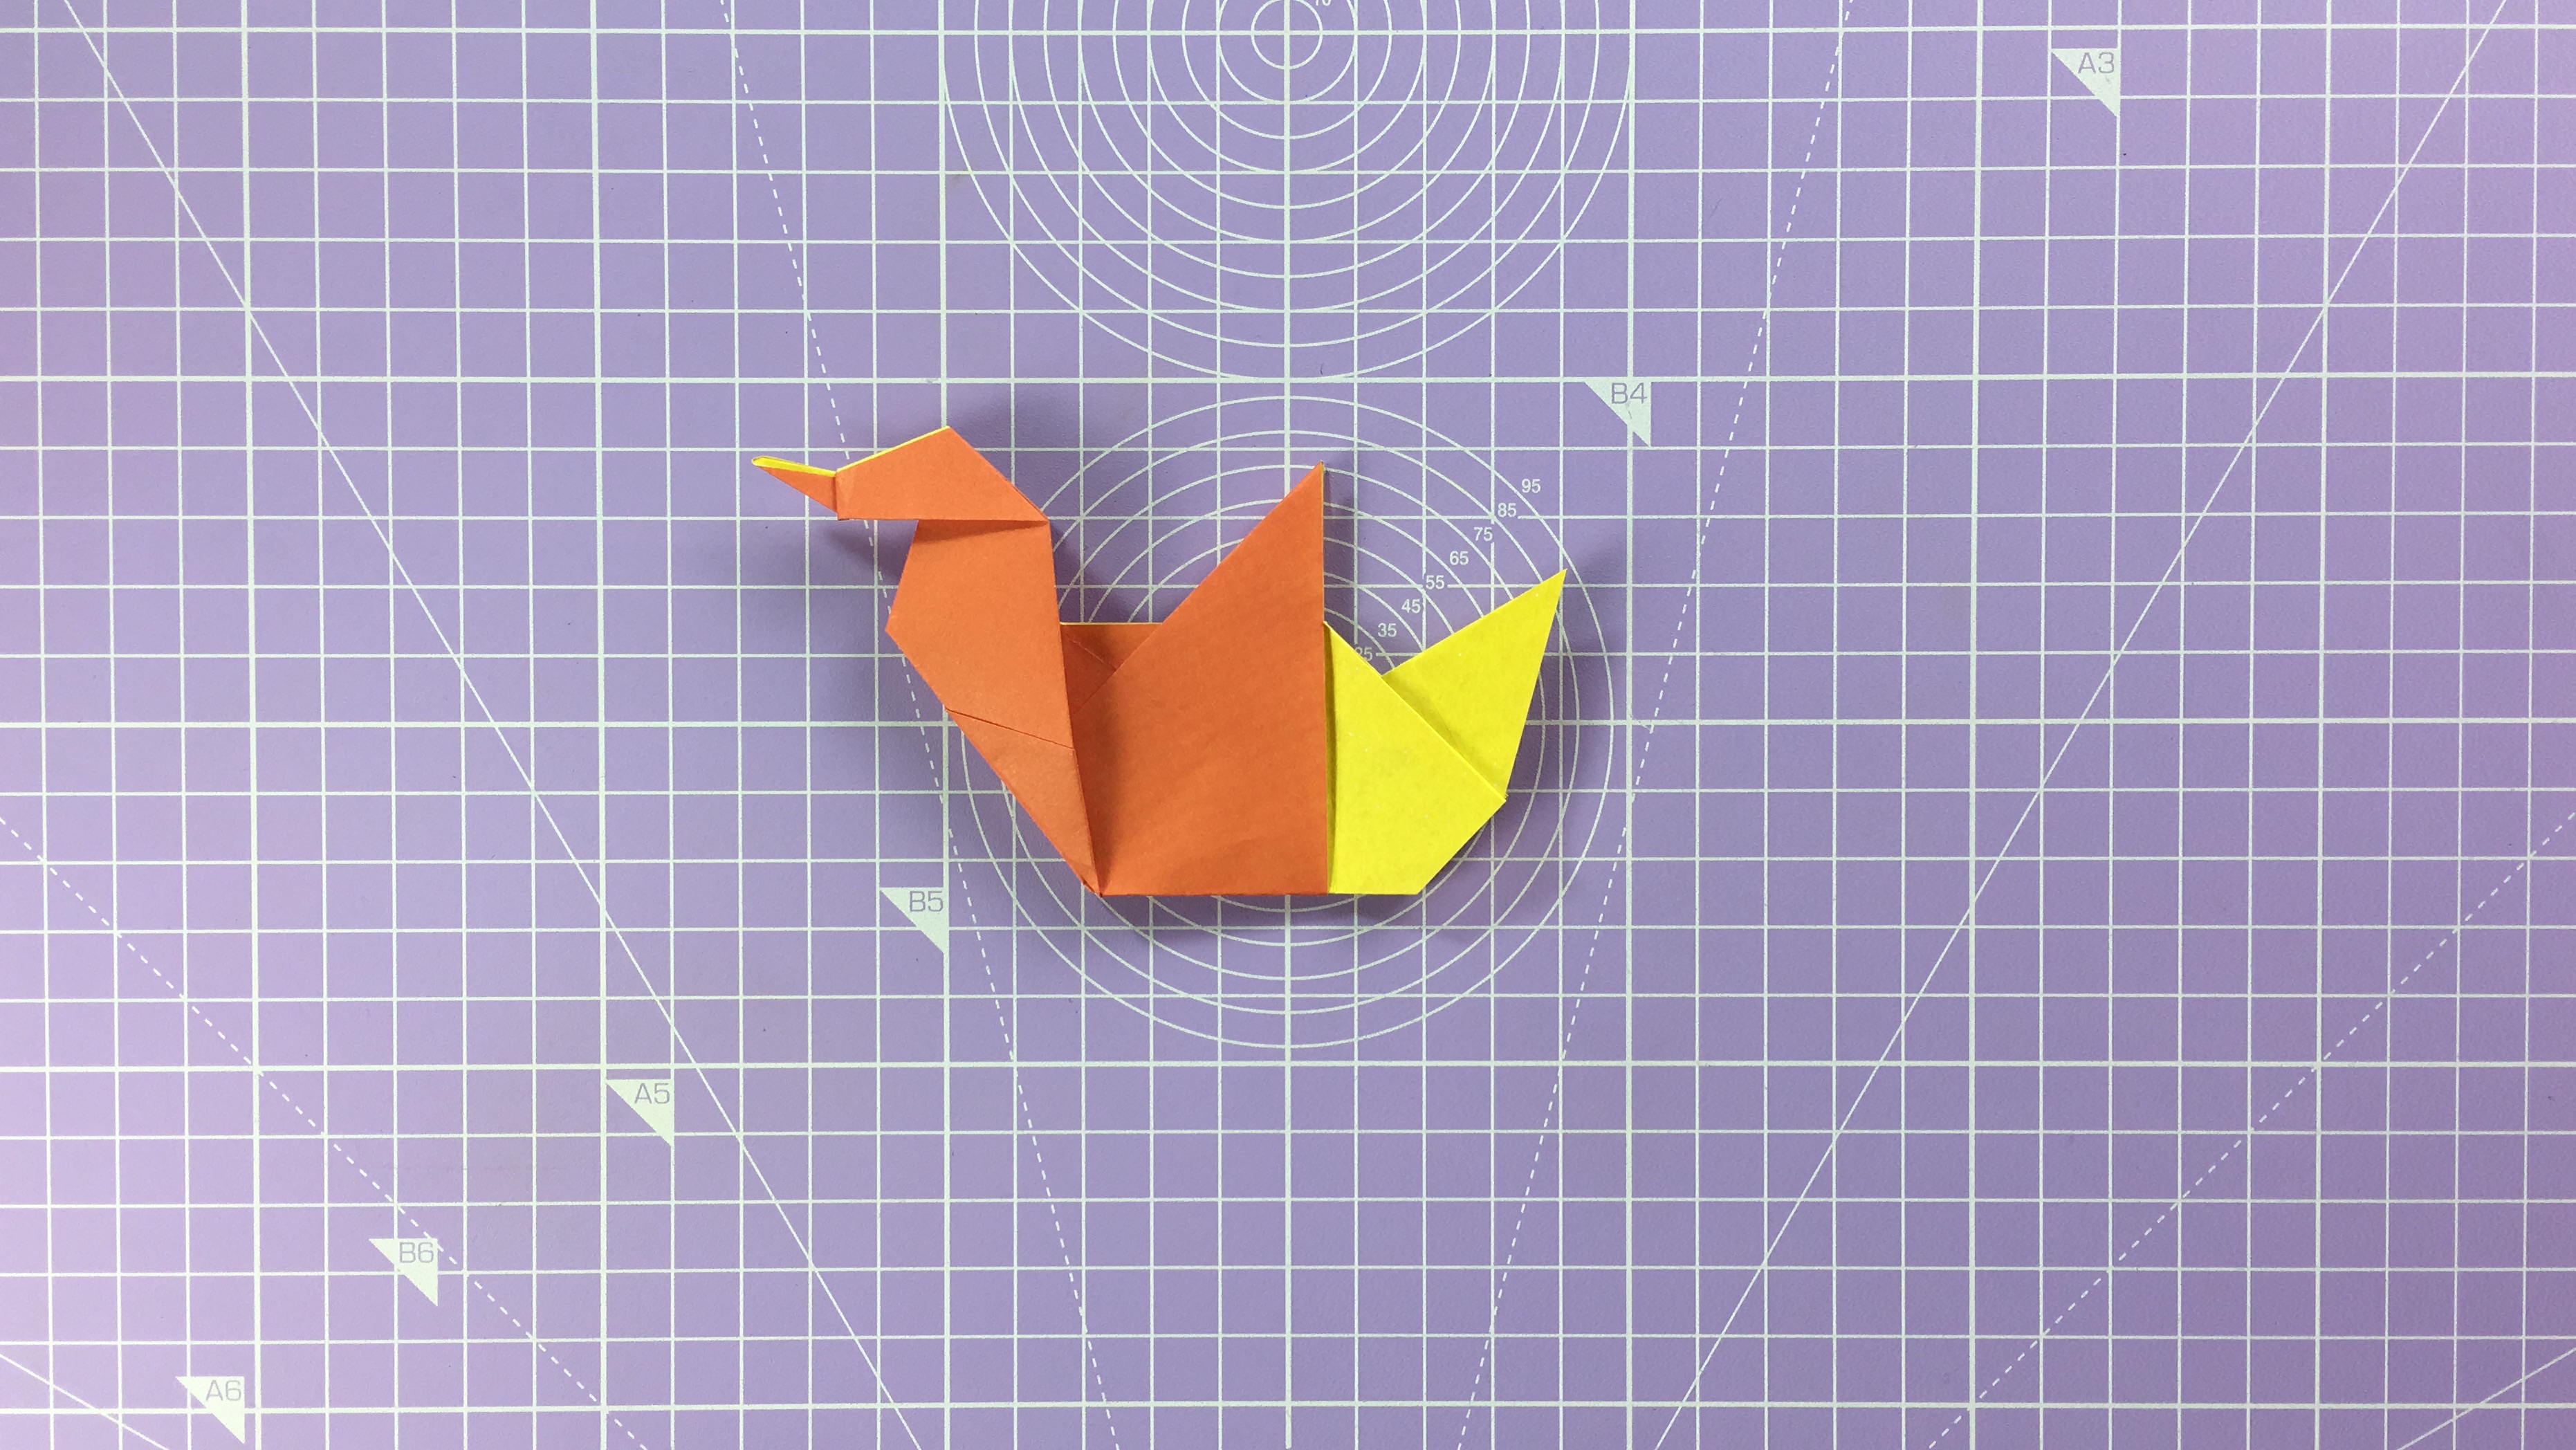 How to make an origami duck - step 20